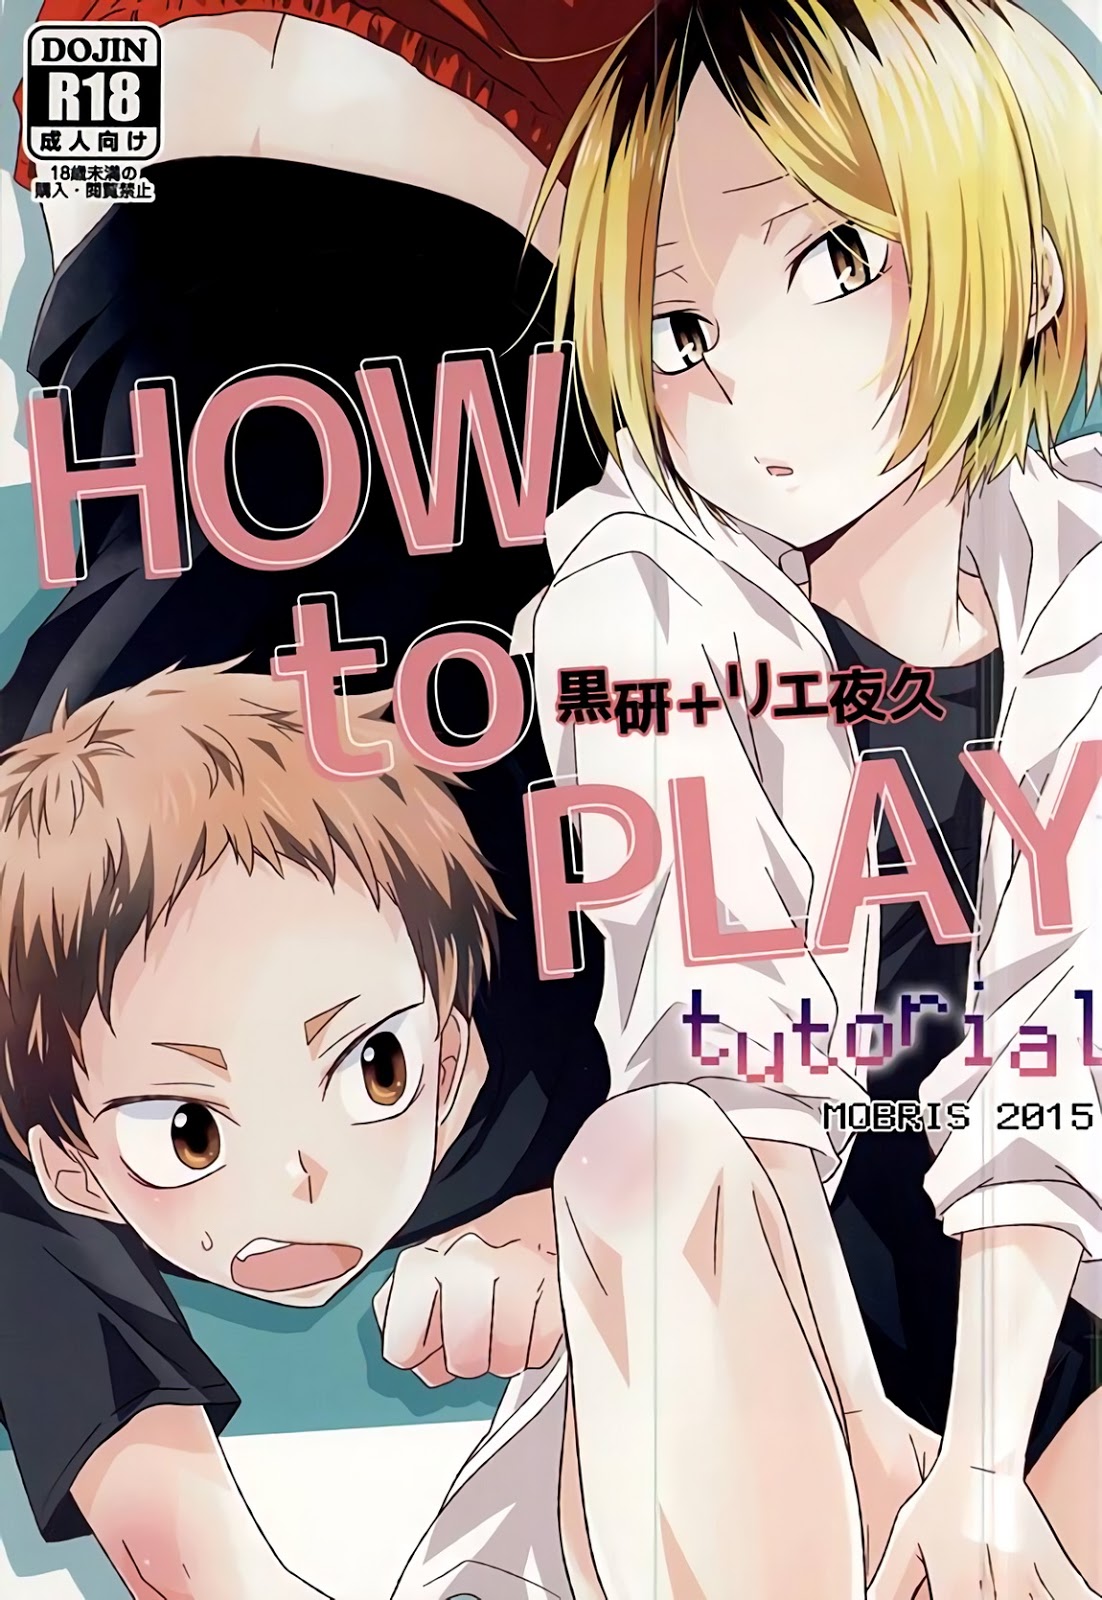 (SPARK10) [MOBRIS (Tomoharu)] HOWtoPLAY tutrial (Haikyuu!!) [English] [Homies over Hoes] (SPARK10) [MOBRIS (トモハル)] HOWtoPLAY tutrial (ハイキュー!!) [英訳]